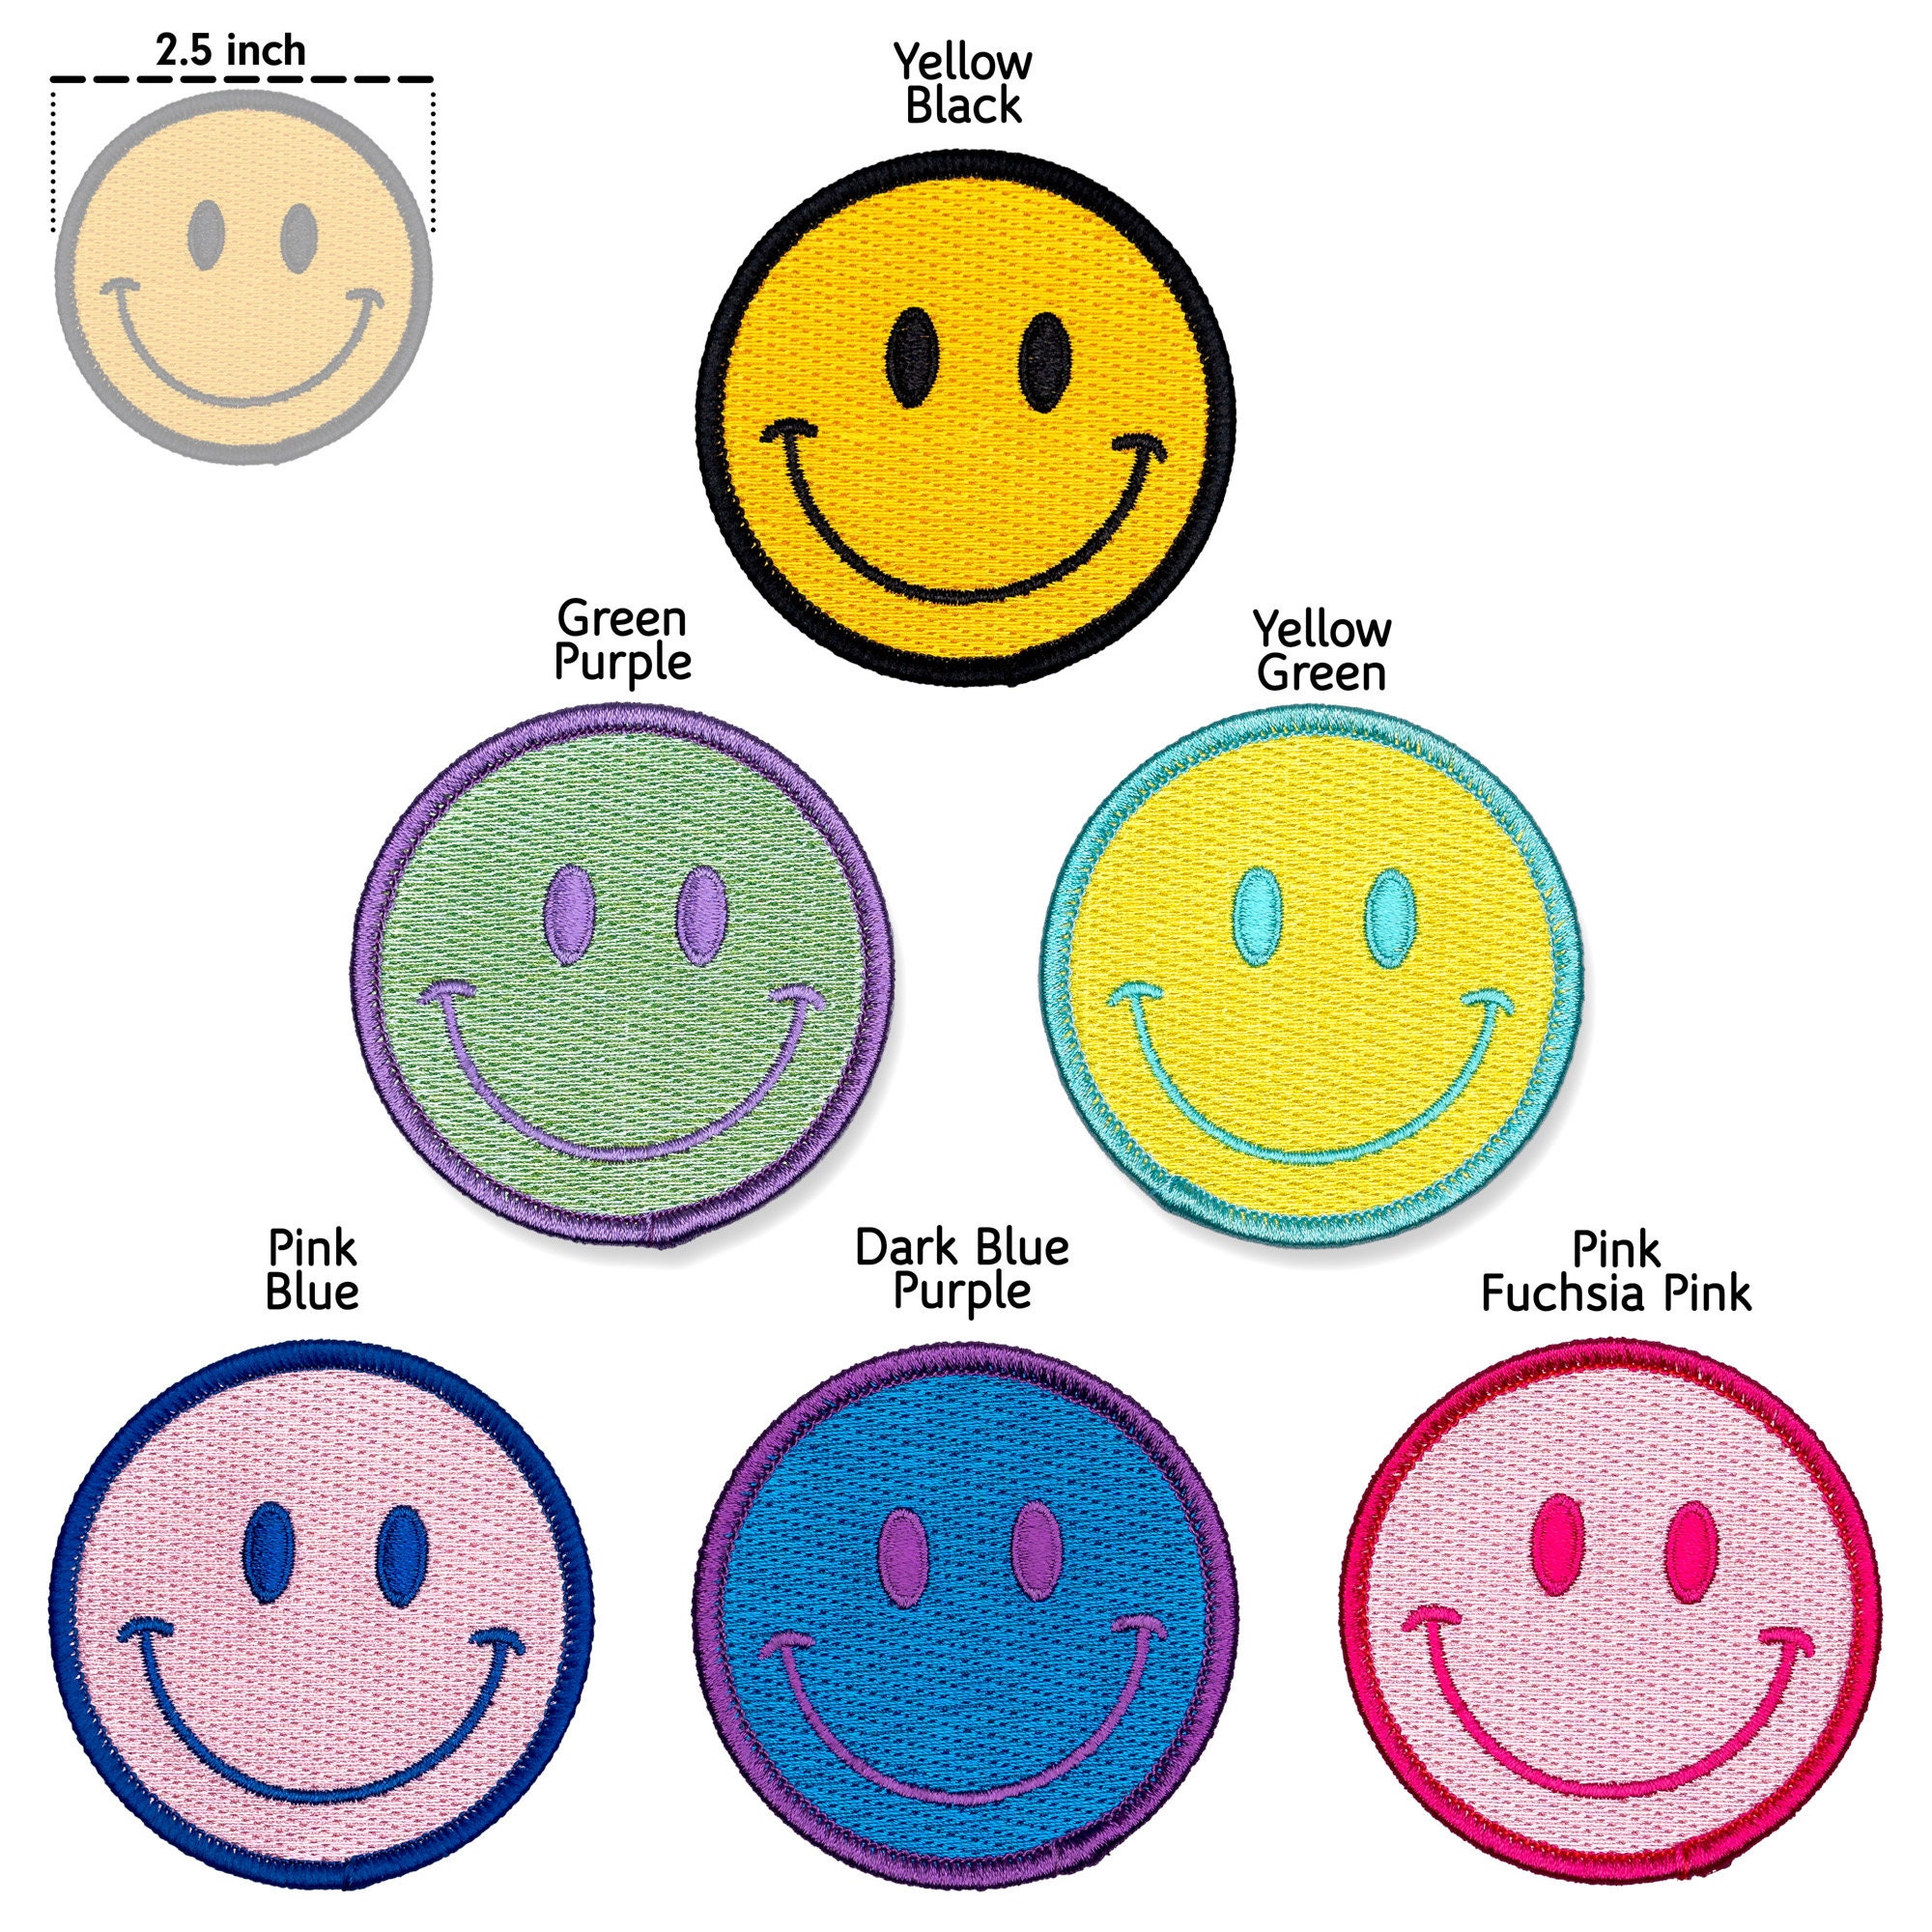 Step 2: Pick A Patch - Smiley Faces